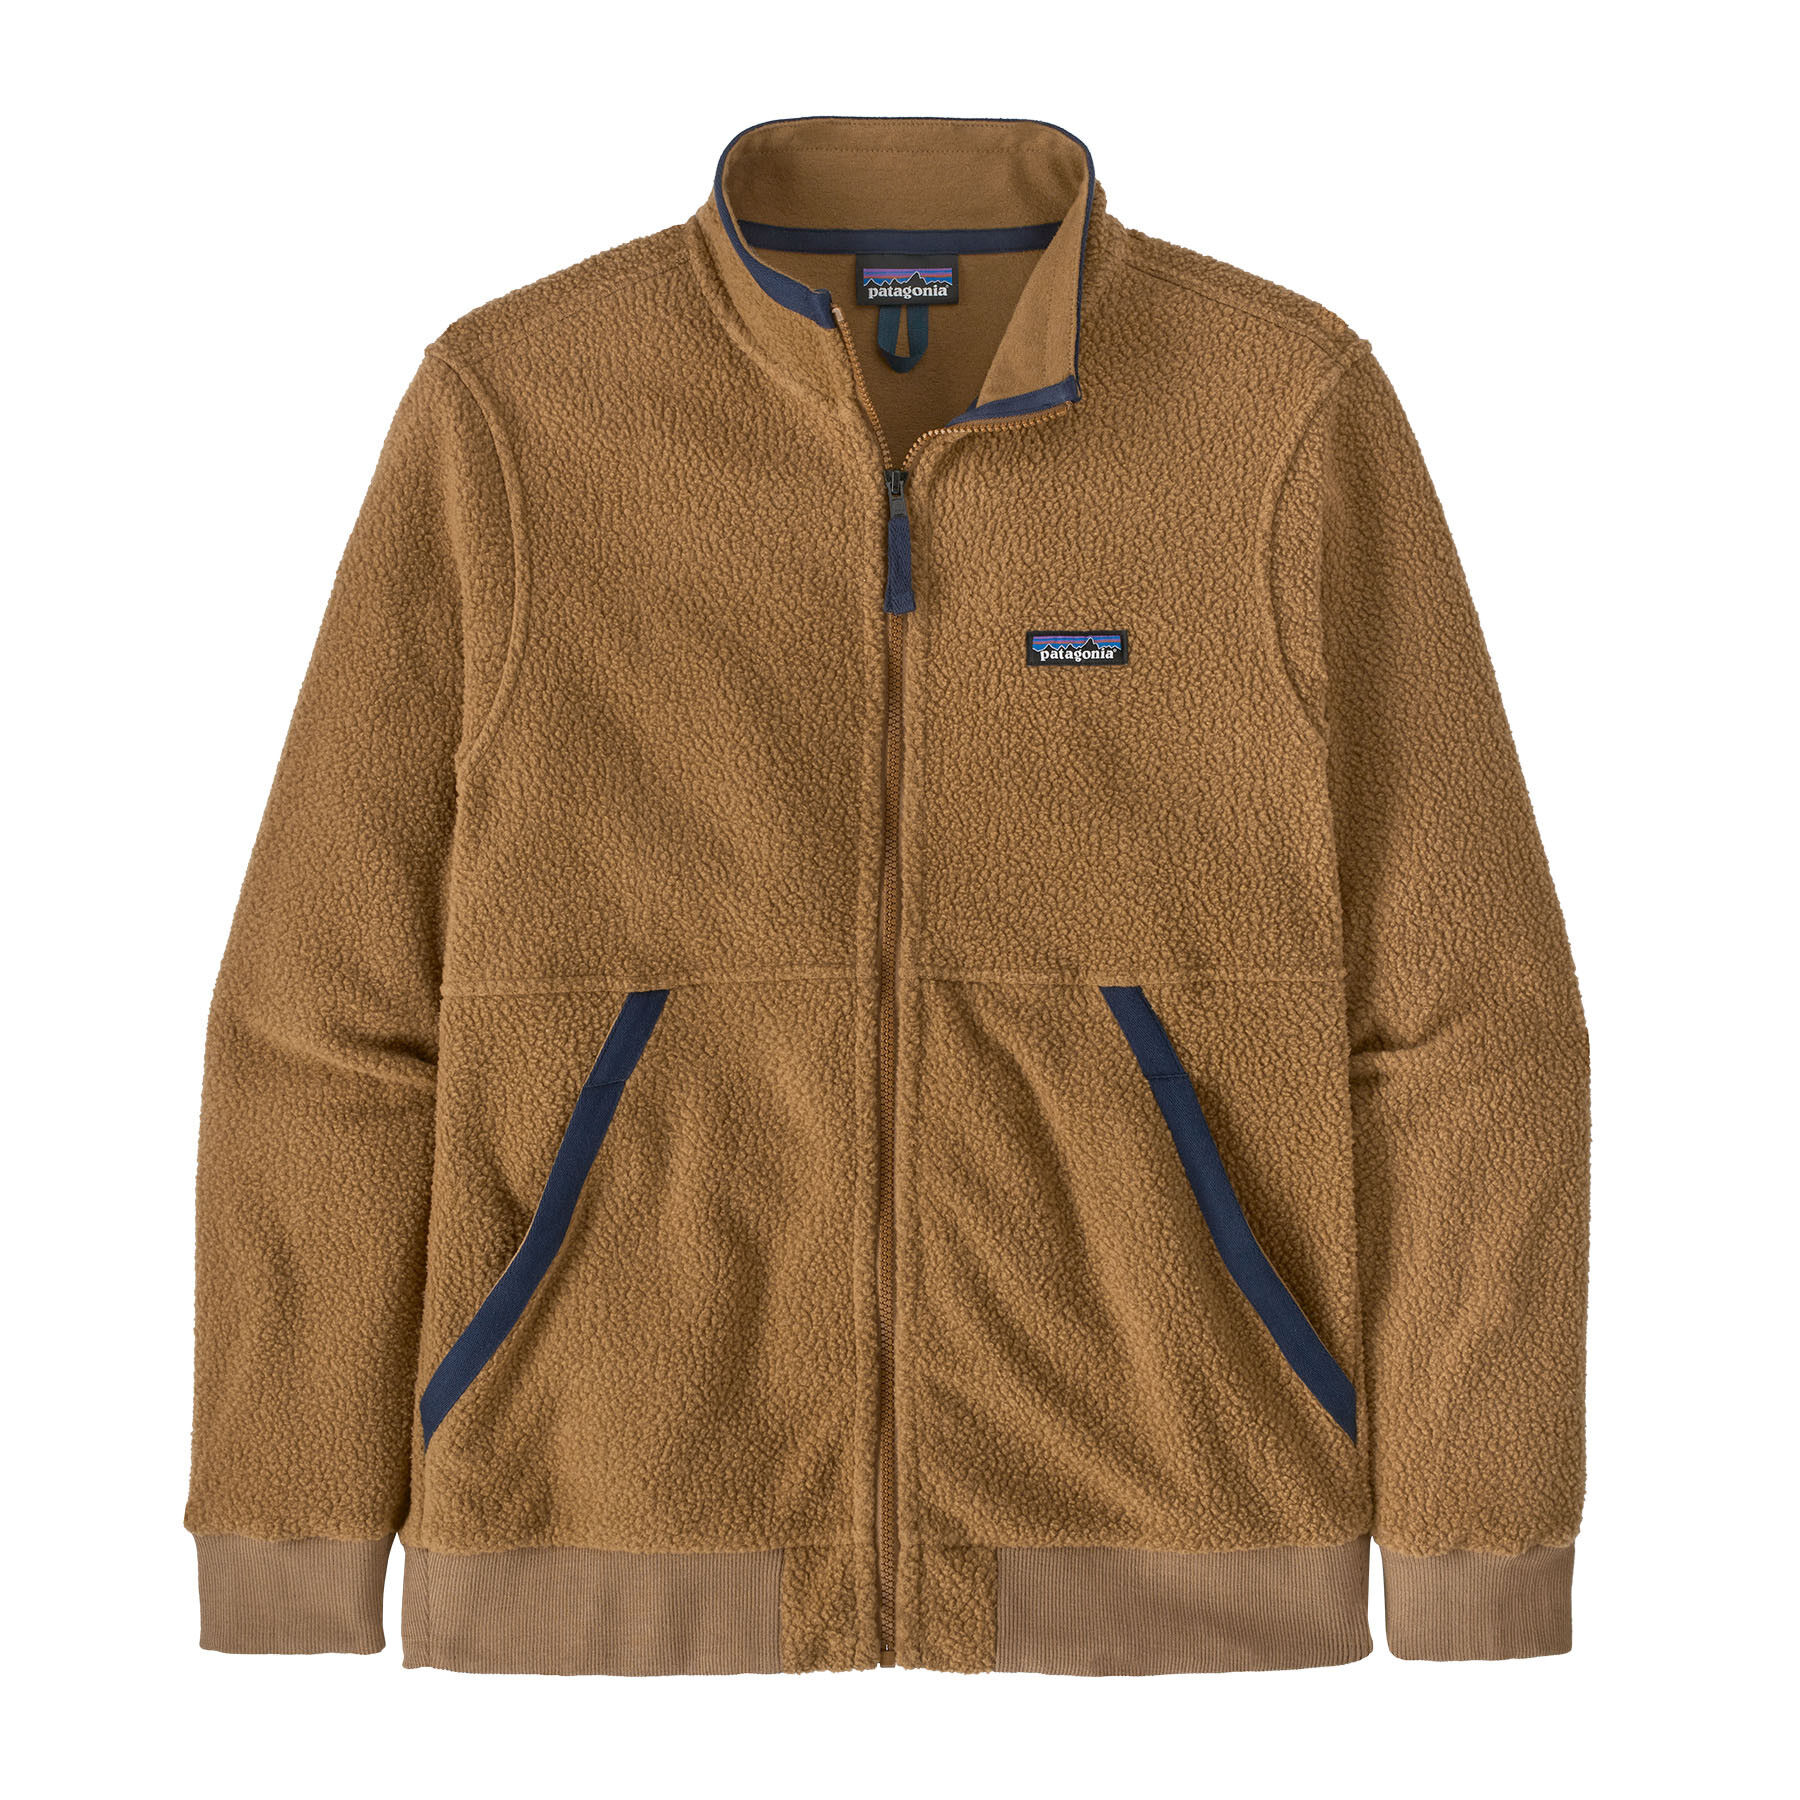 Patagonia Shearling Jacket - Polaire homme | Hardloop